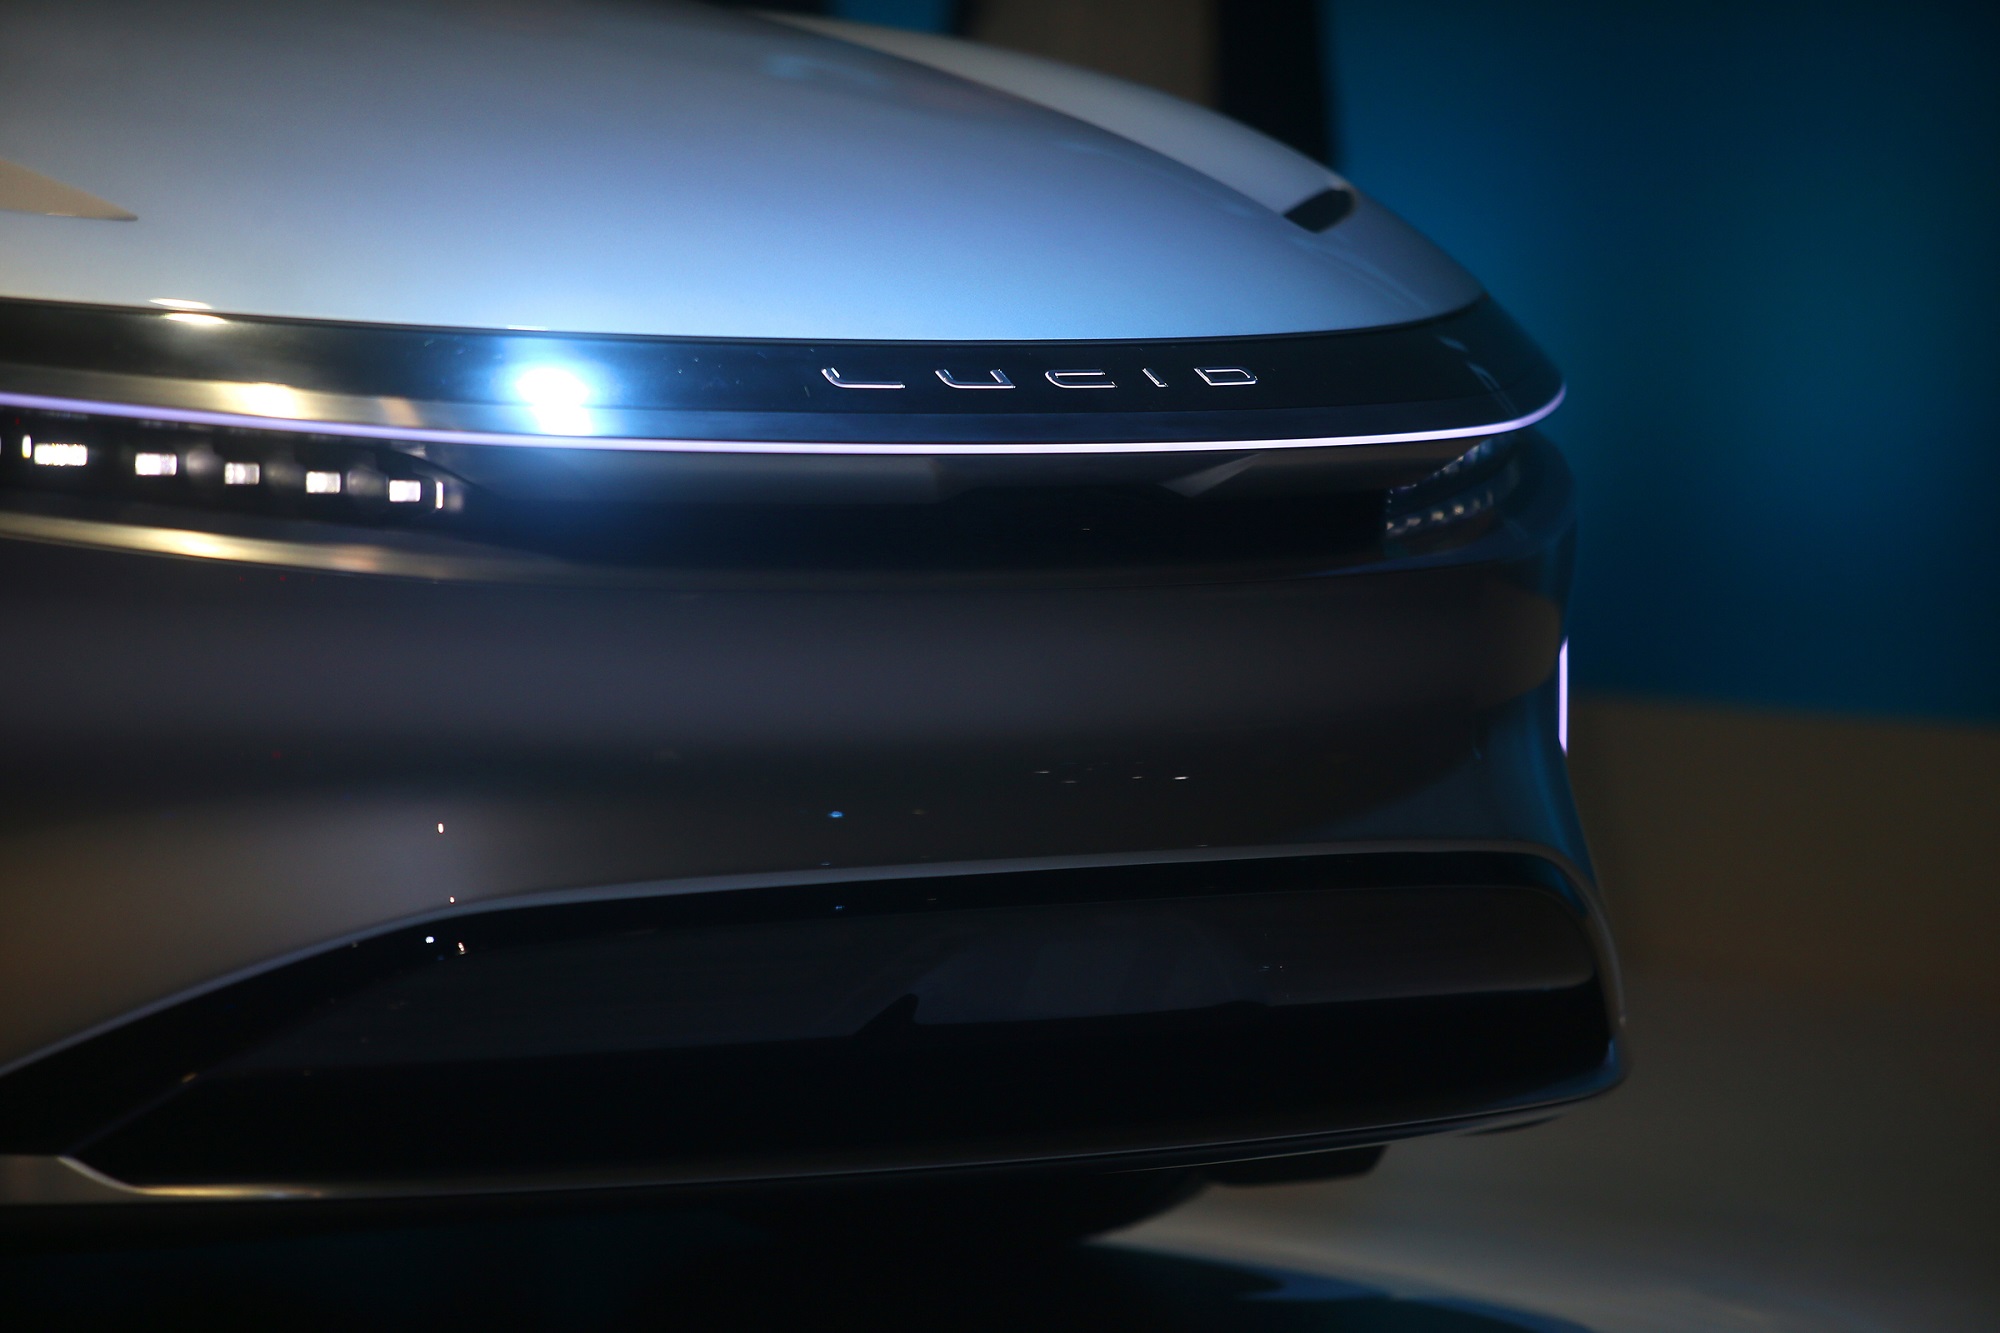 A Lucid Air smashed other production car records at Goodwood Festival of Speed.